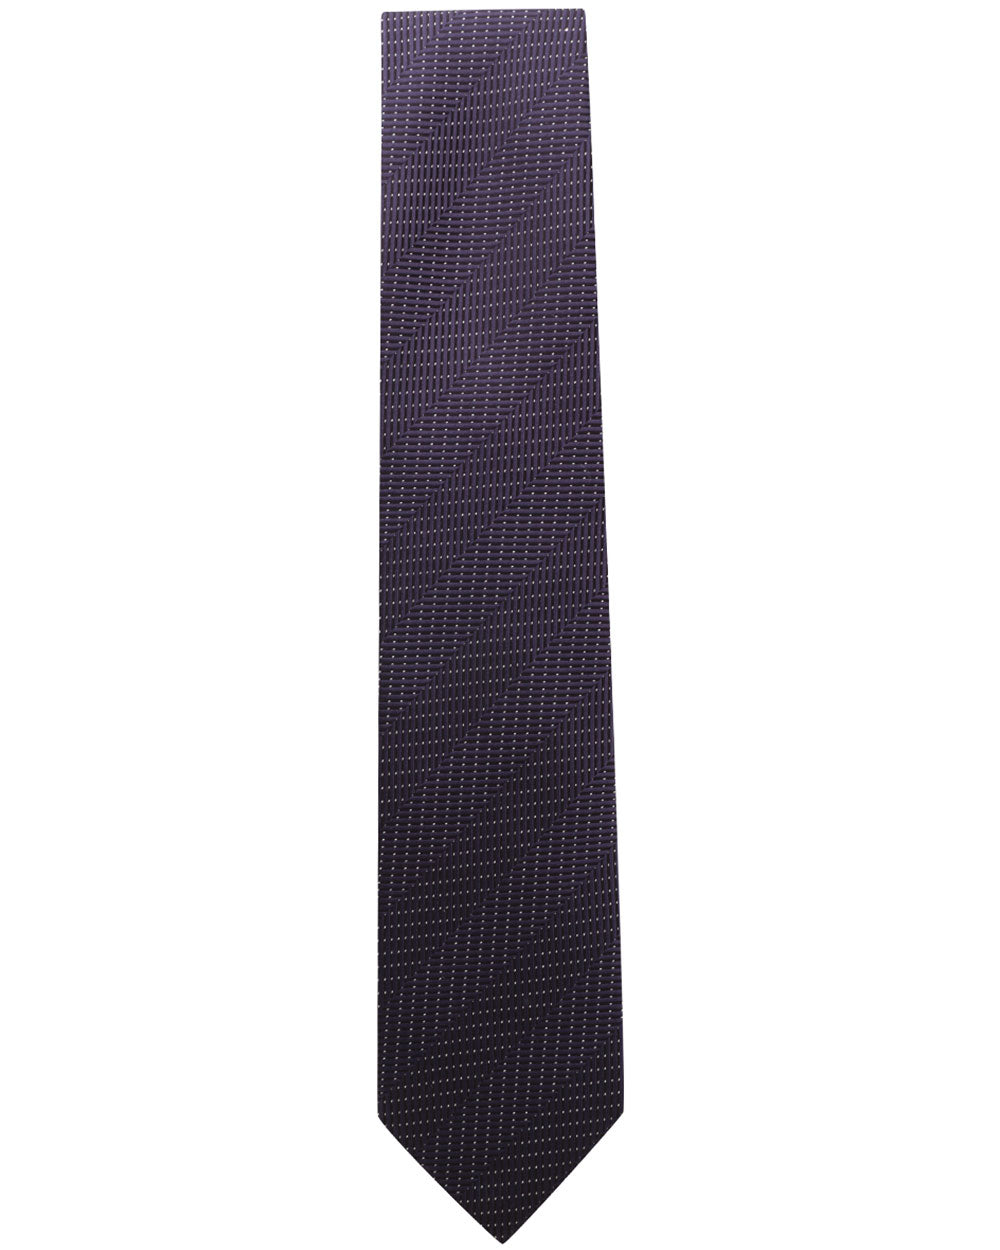 Brioni Midnight Blue and Off White Micro Patterned Striped Tie ...